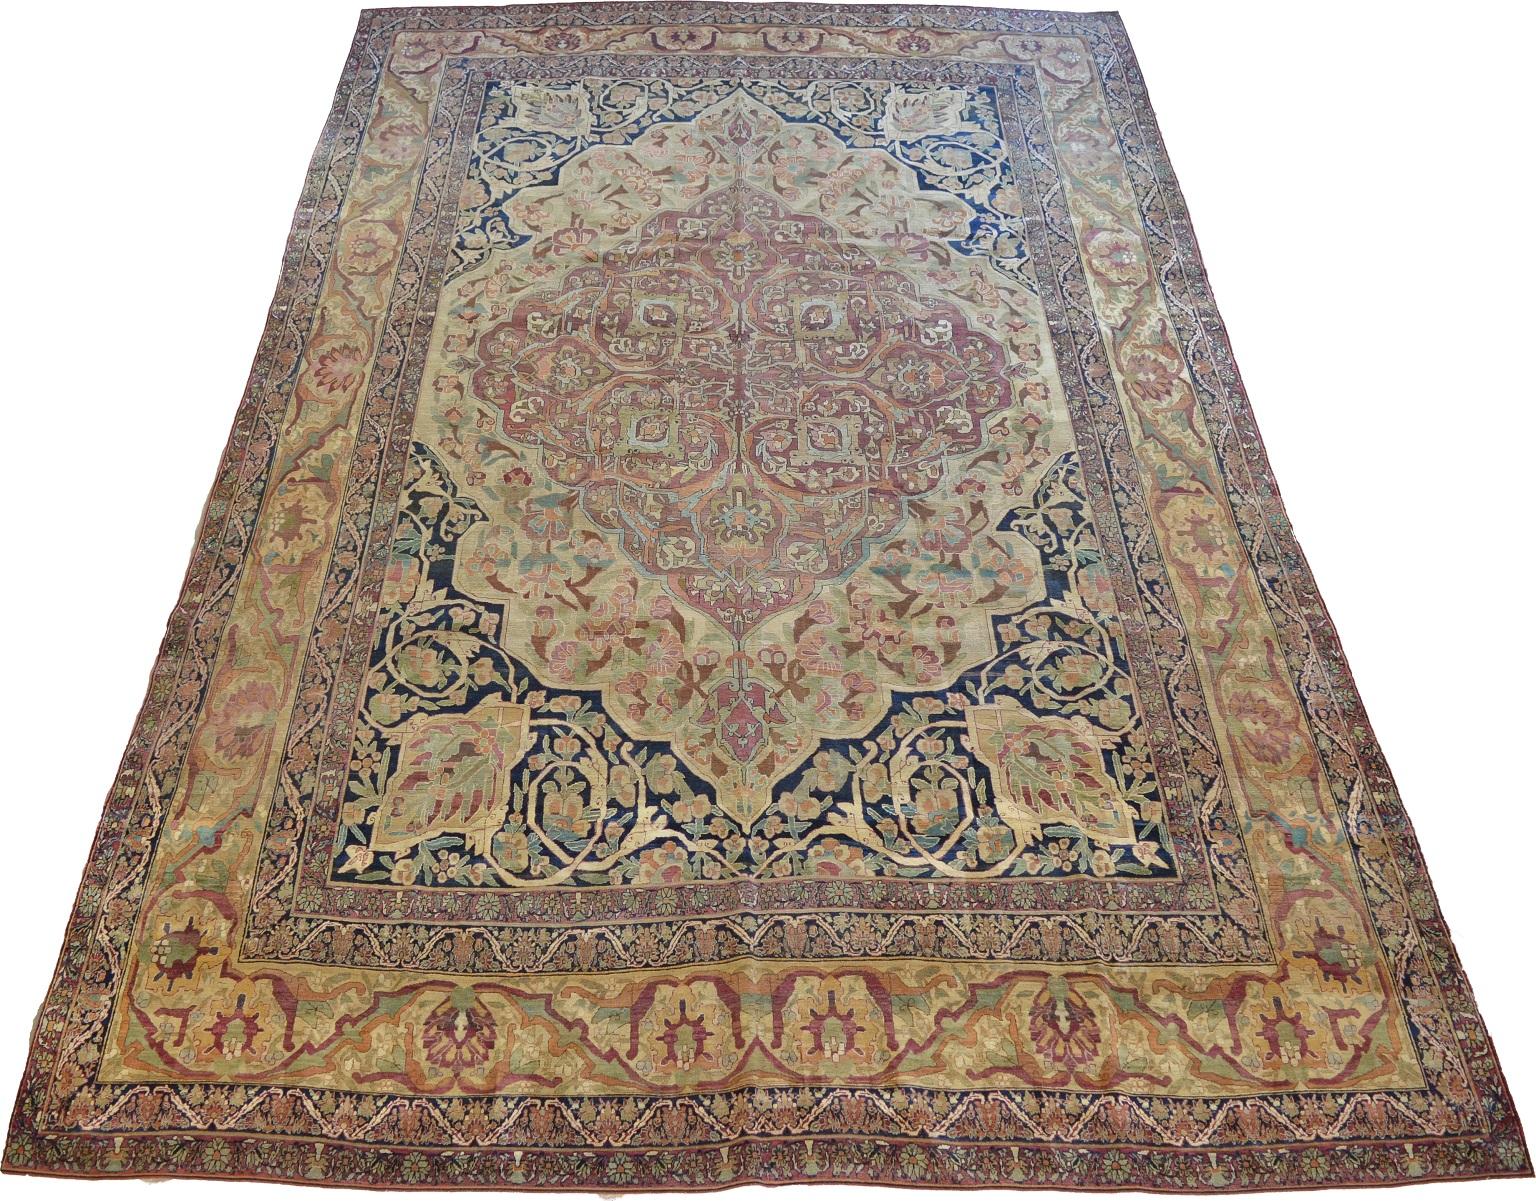 This antique Persian Kermanshah carpet created circa 1870 showcases a floral design with unique coloration and an elaborate central medallion. Created to honor Shah Naymatollah Ali, exceptional attention to detail has been given to every facet of